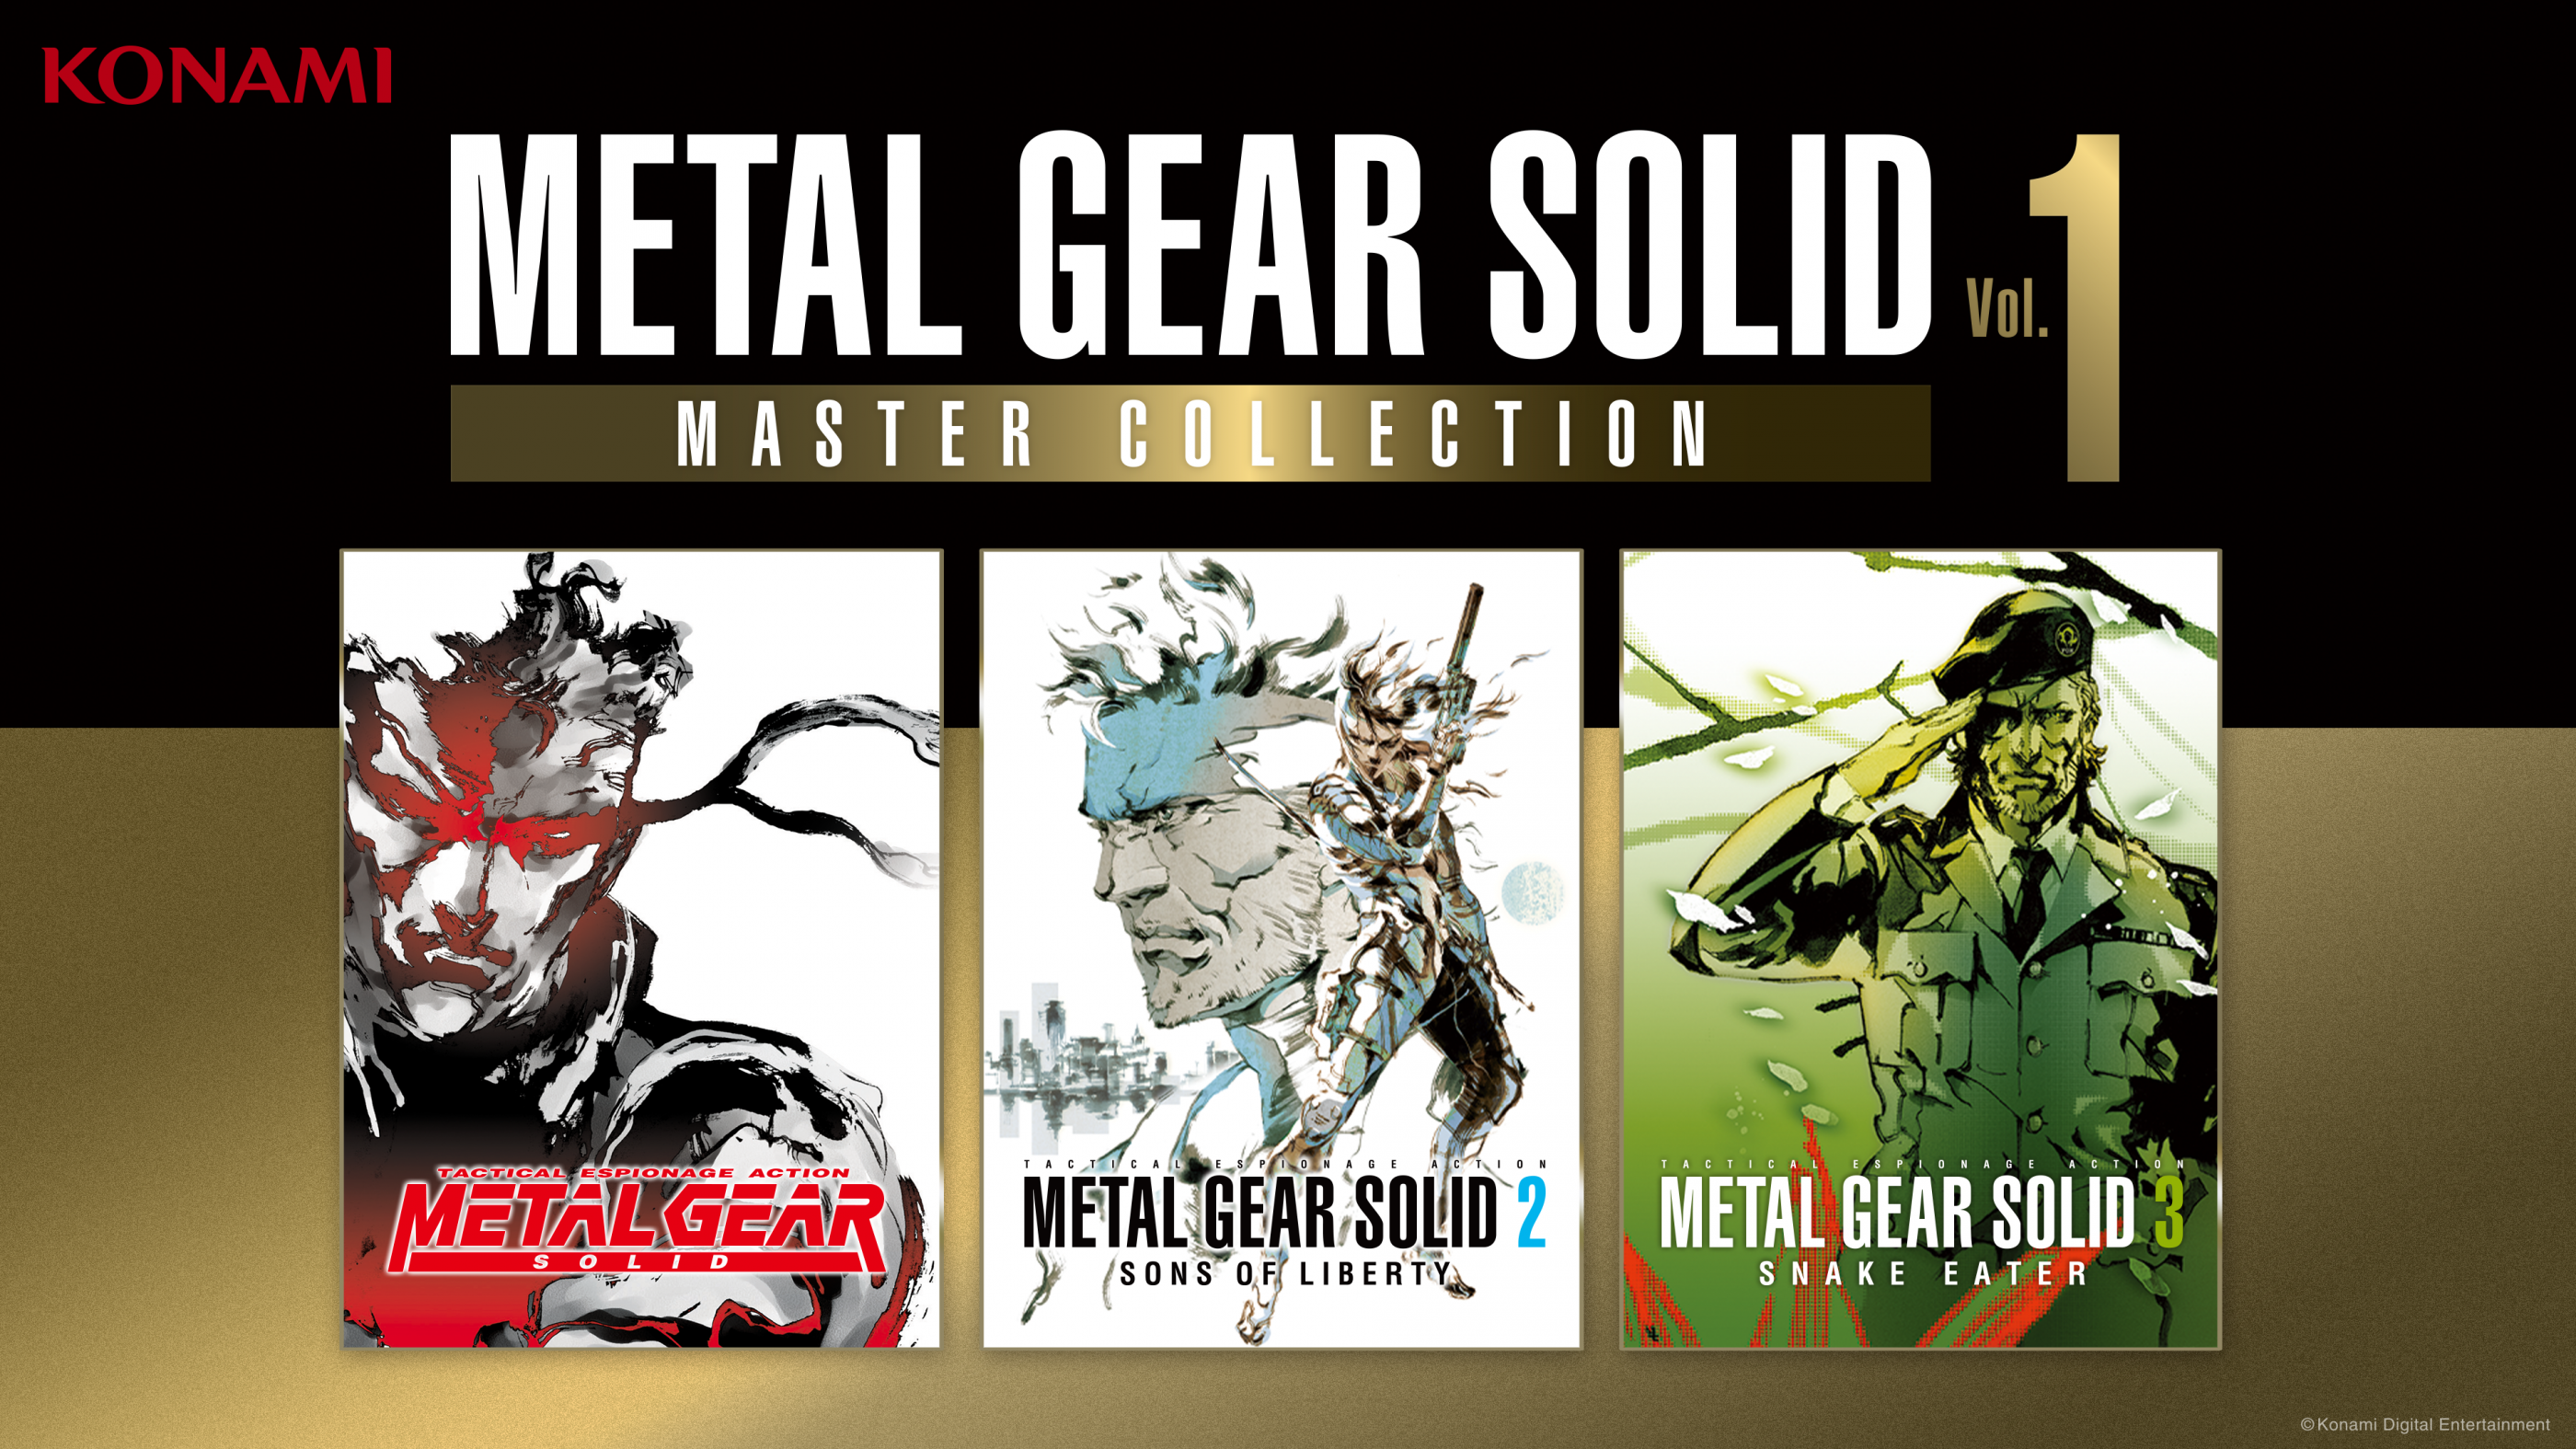 Metal Gear Solid Master Collection Vol 1 will have a physical version on Xbox by Meridiem